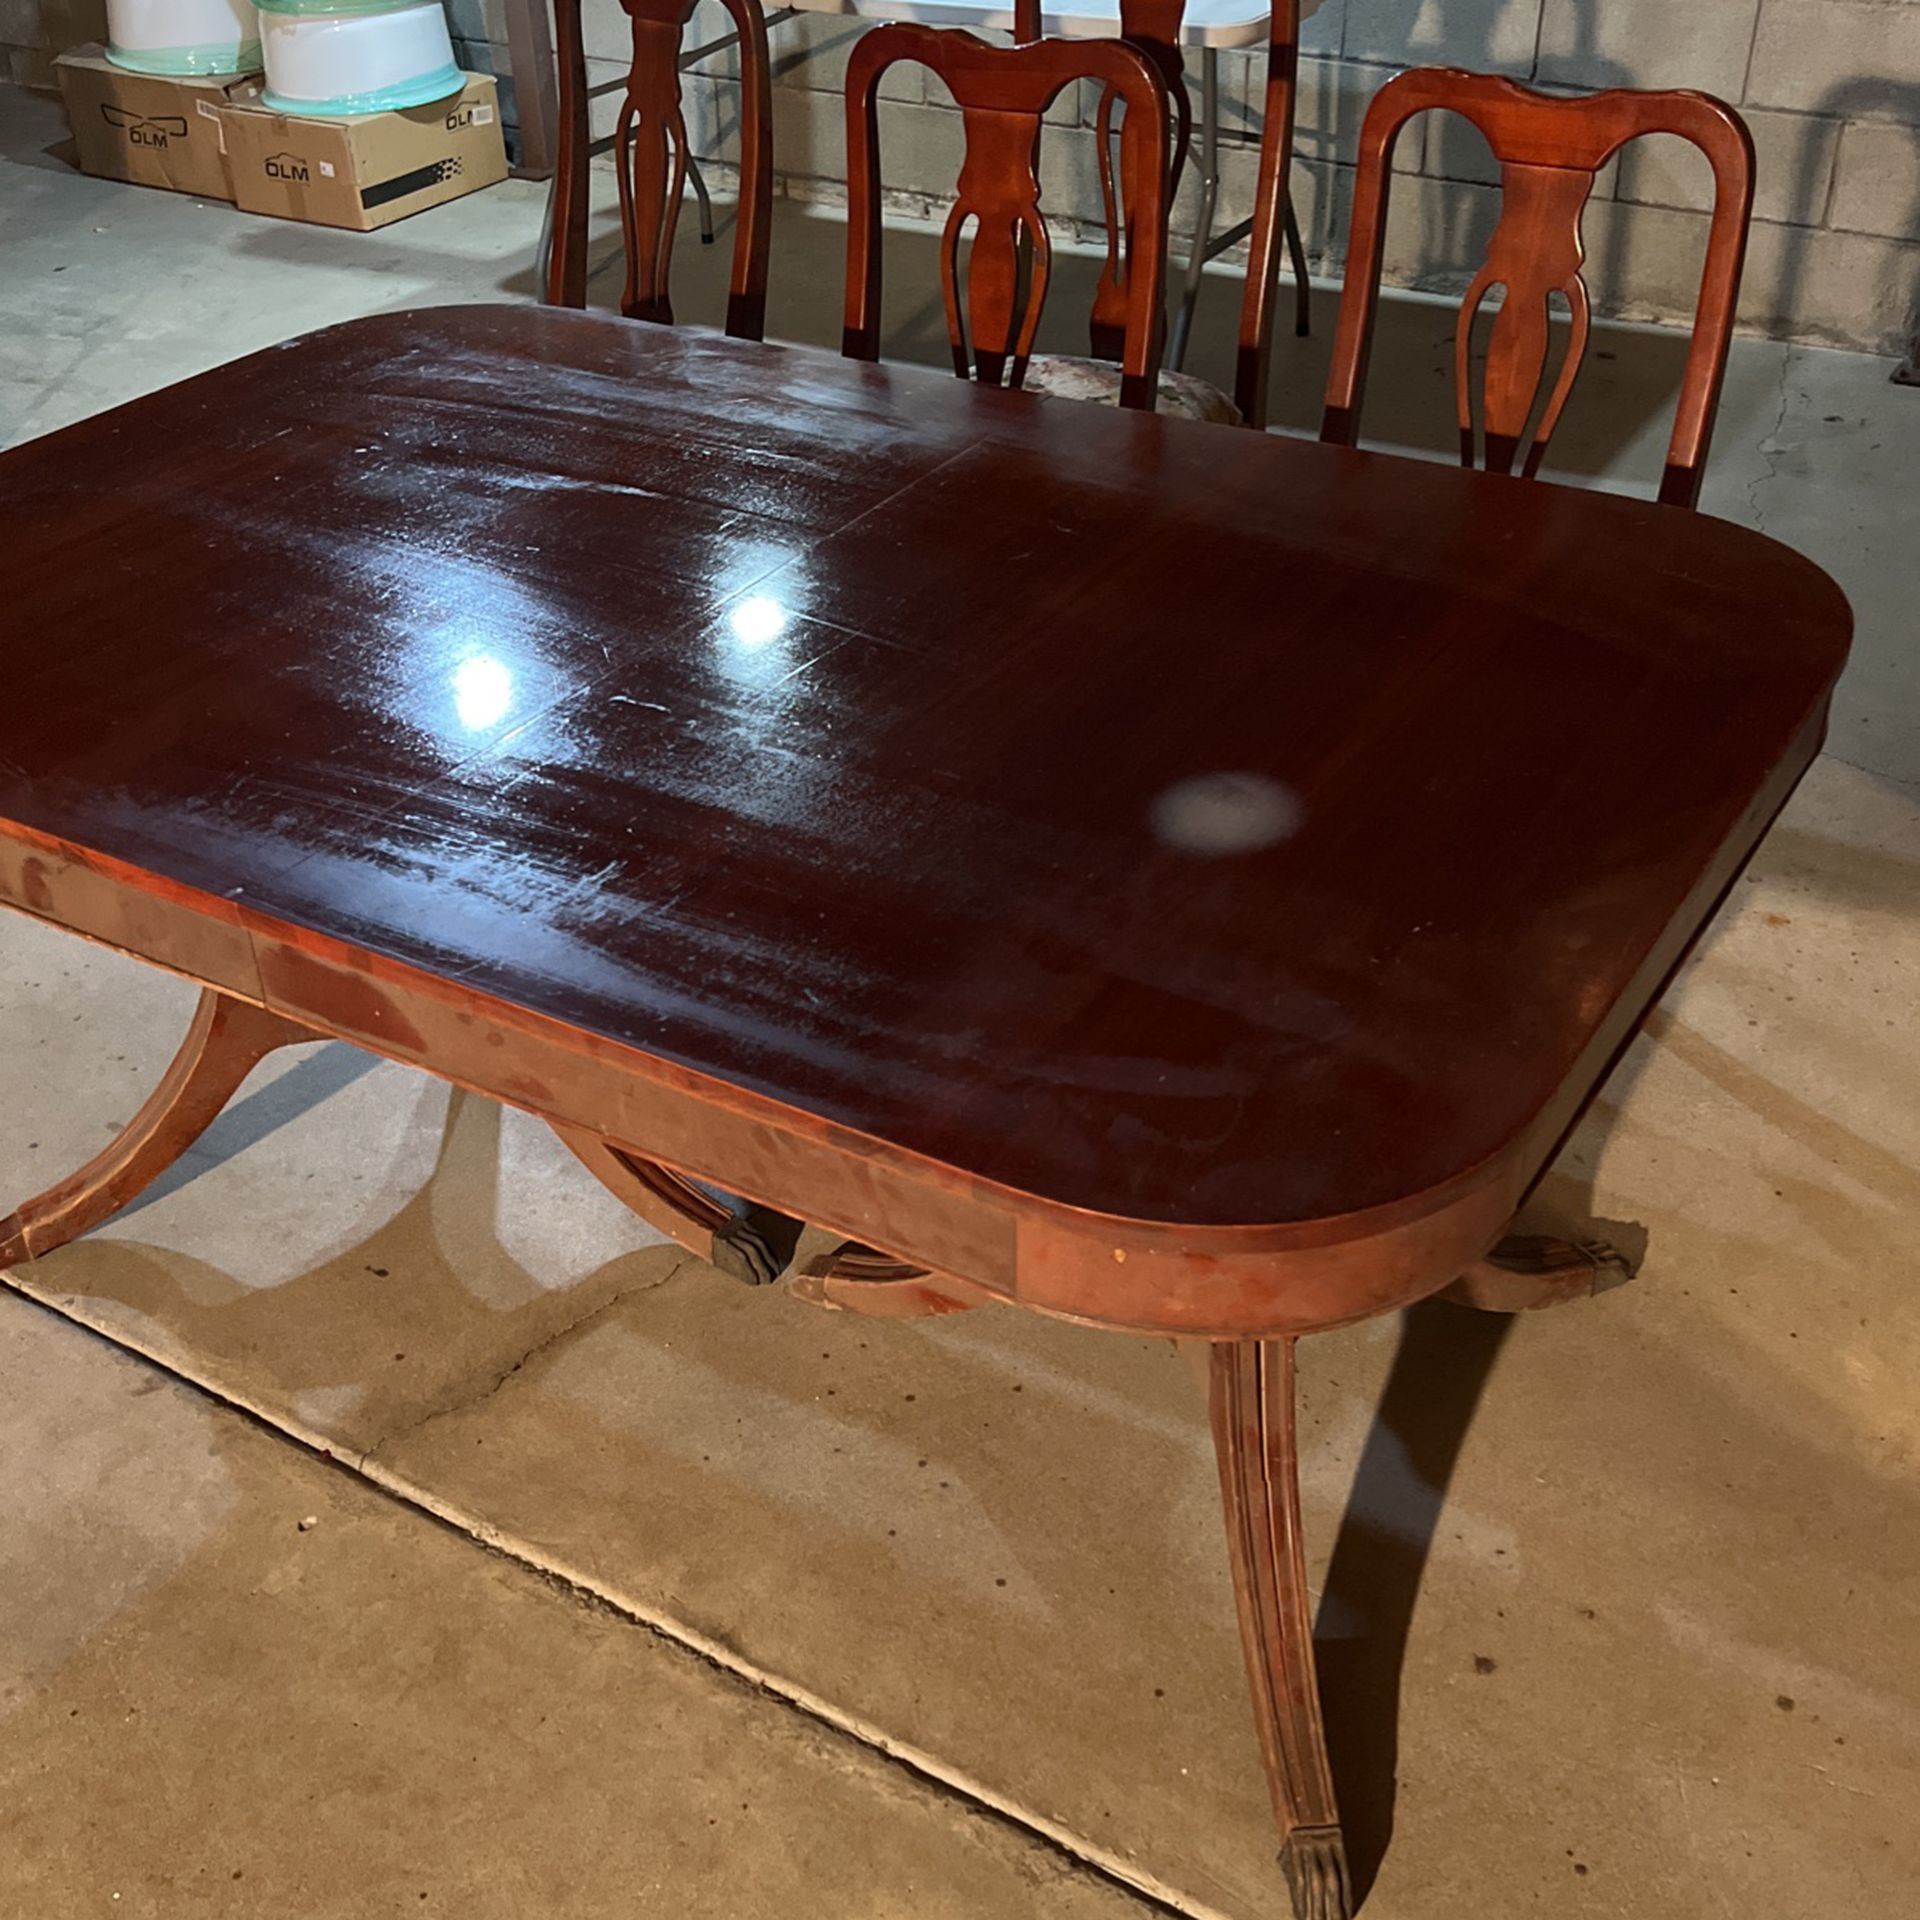 Mahogany, Maple Oak Antique Table Larkin Triangle Paws and Chairs